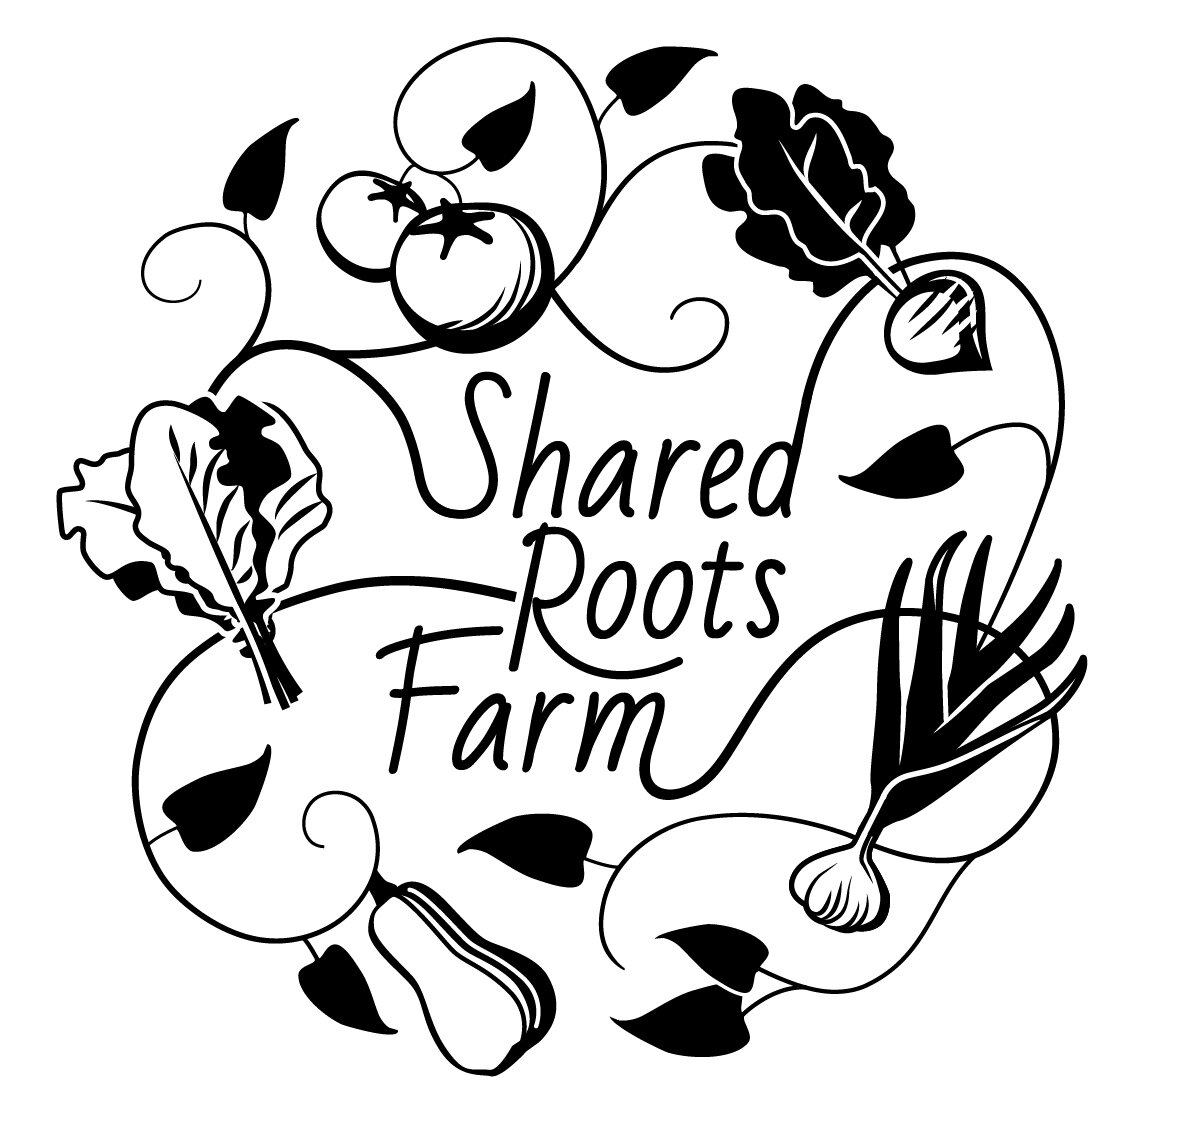 Shared Roots Farm